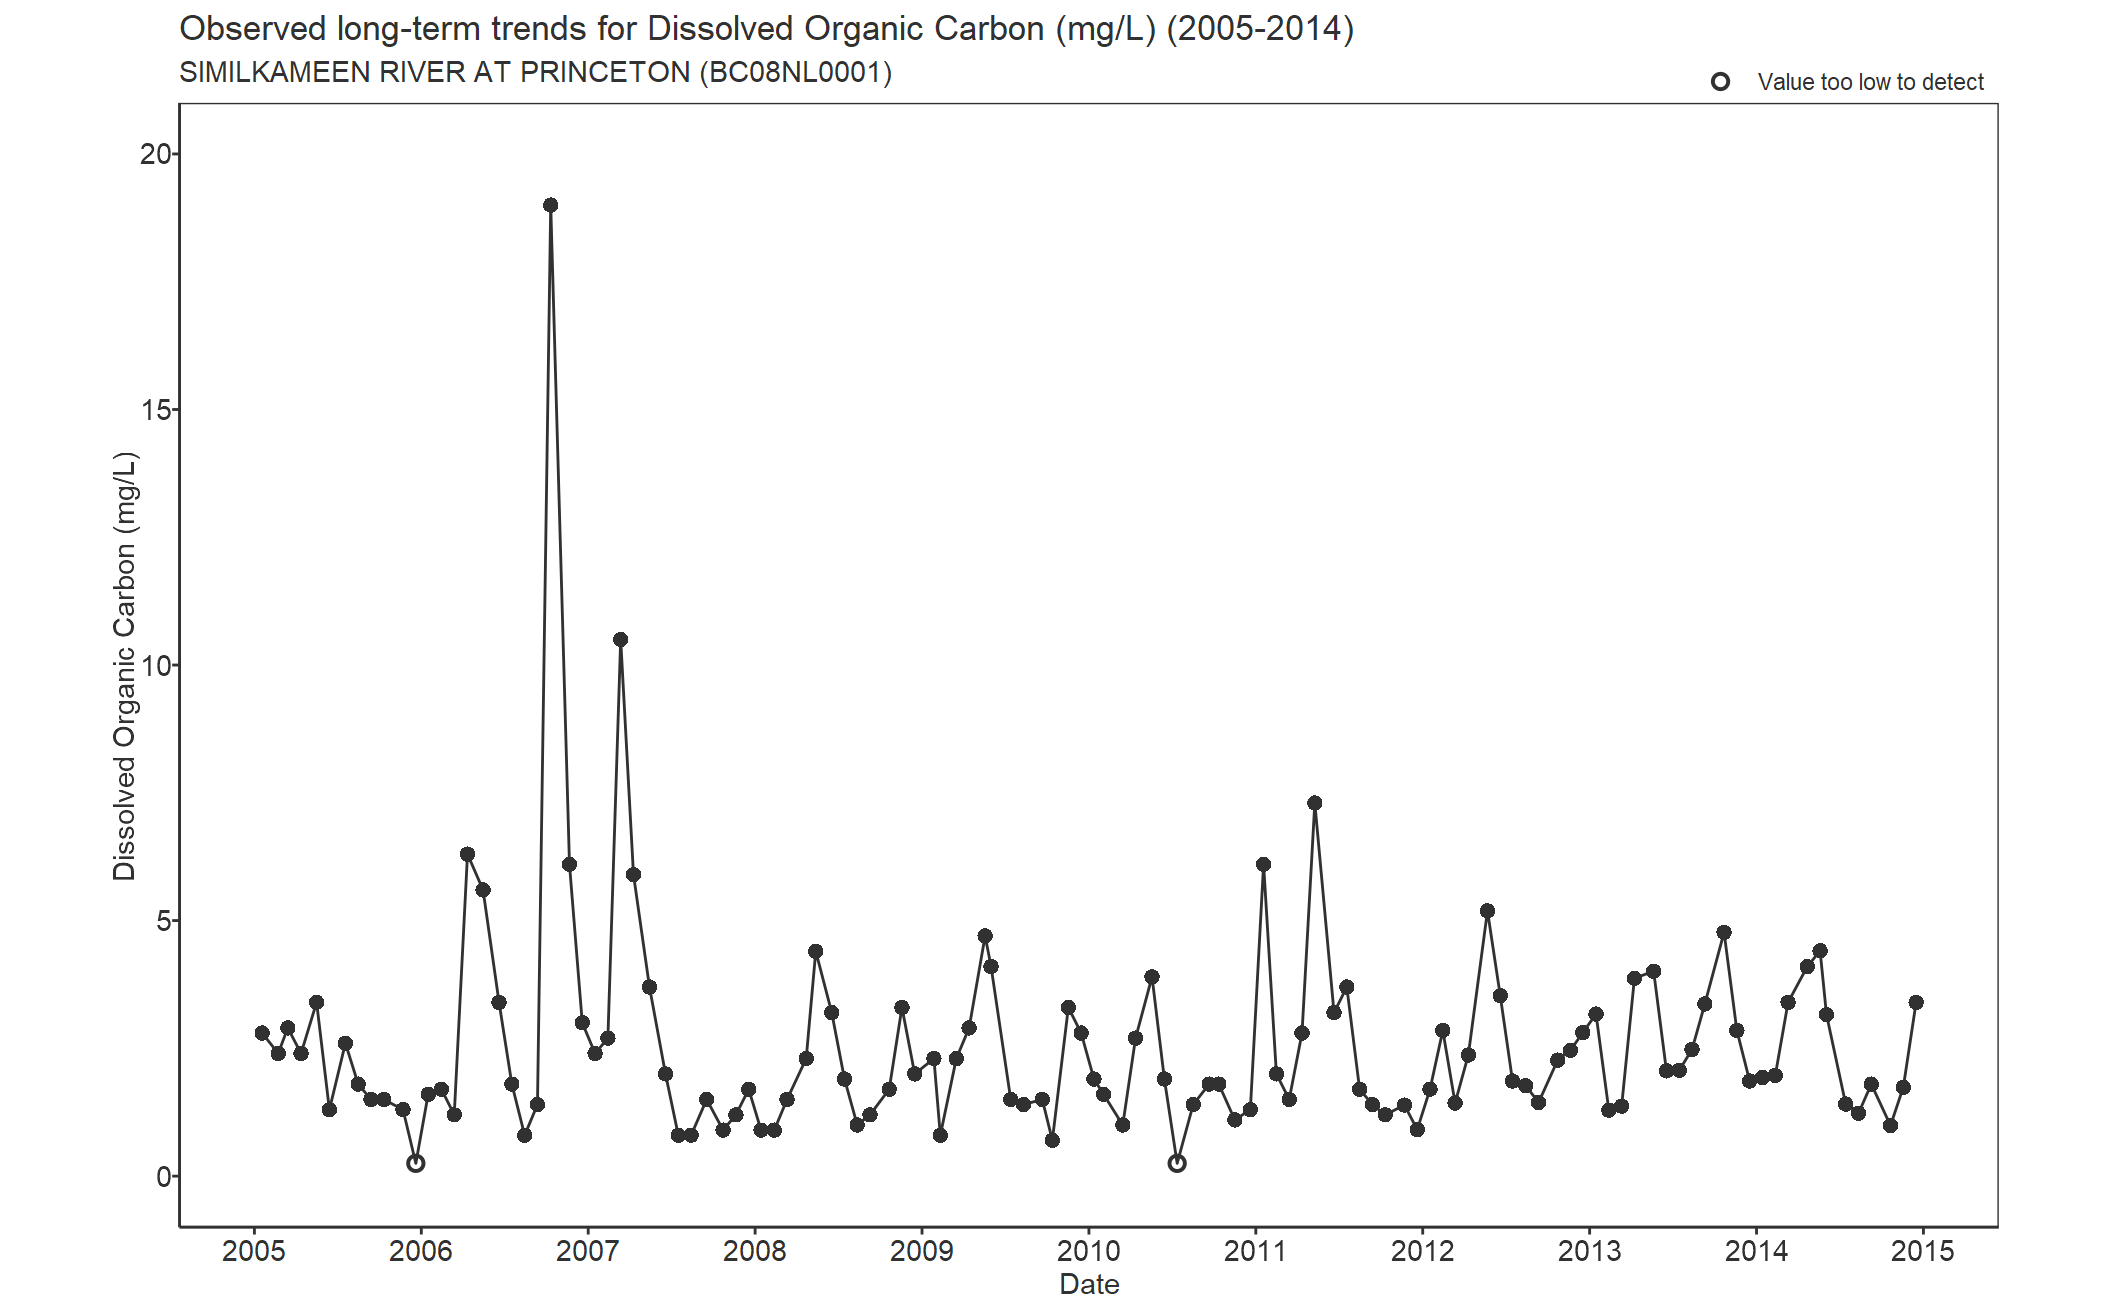 Observed long-term trends for Dissolved Organic Carbon (2005-2014)